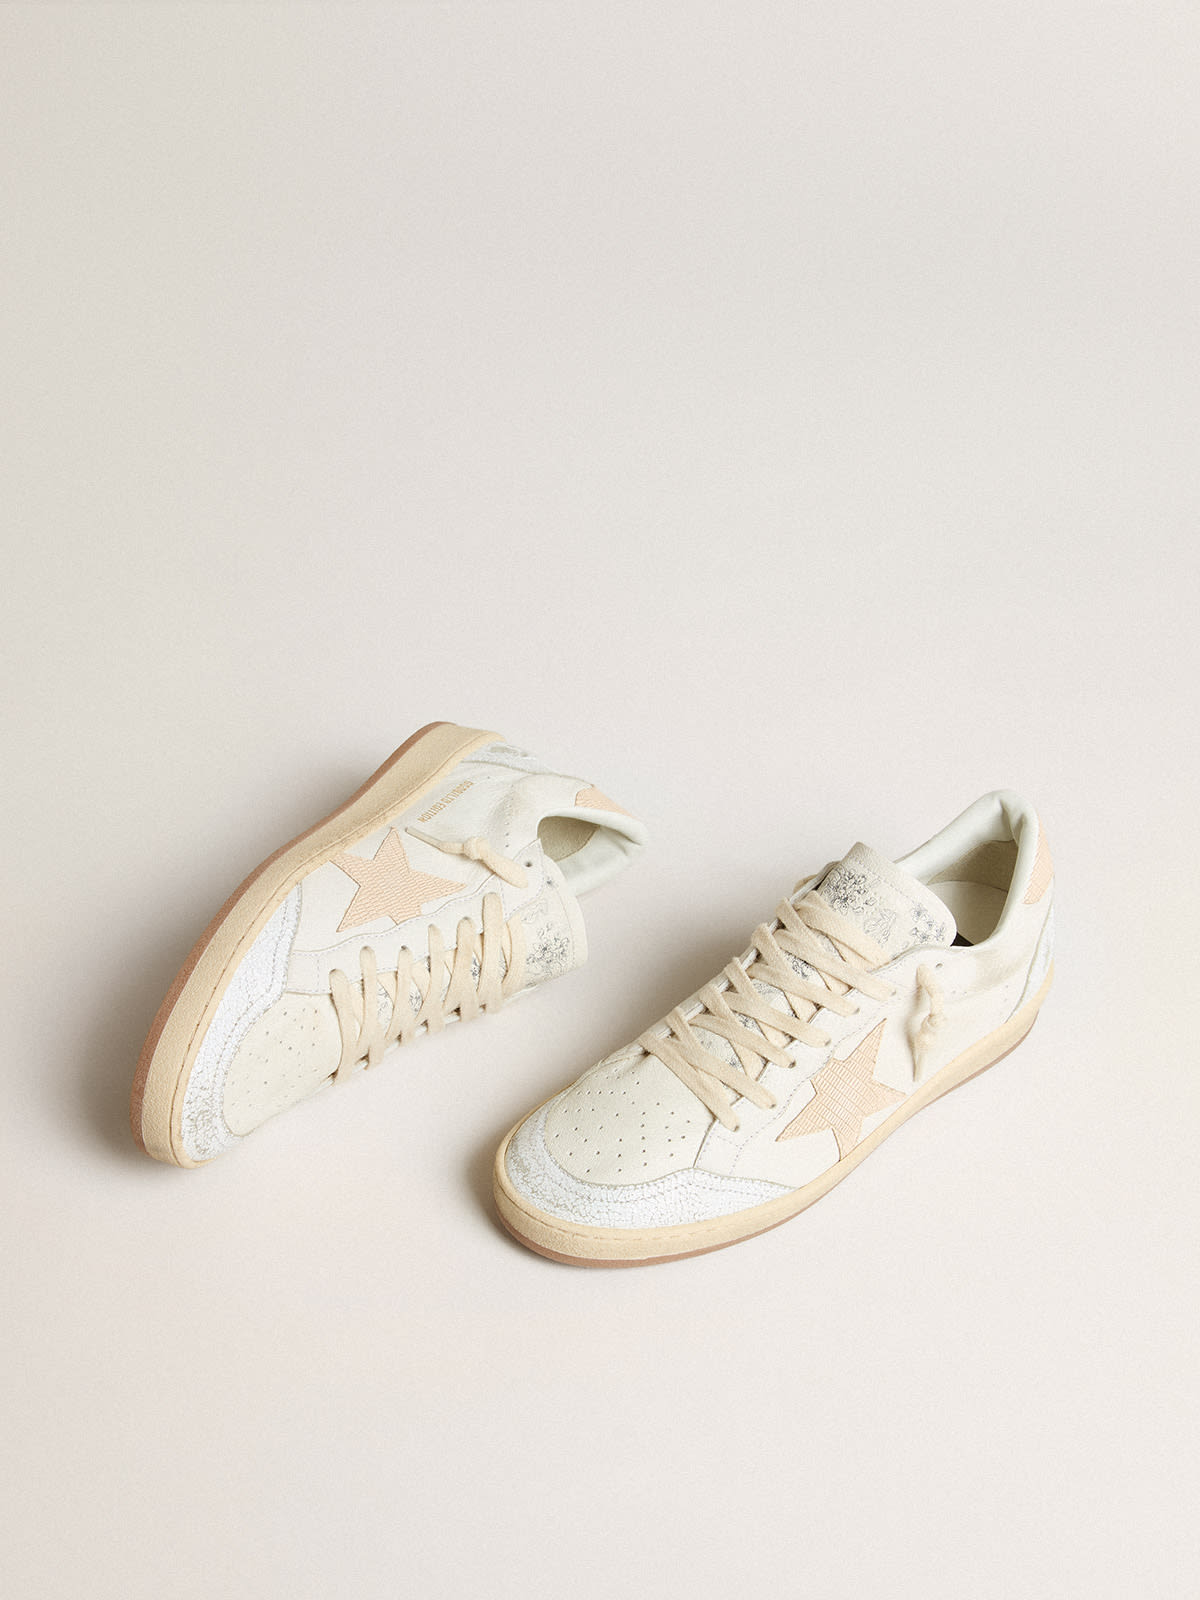 Golden Goose - Men’s Ball Star LTD CNY in white leather with ivory star in 